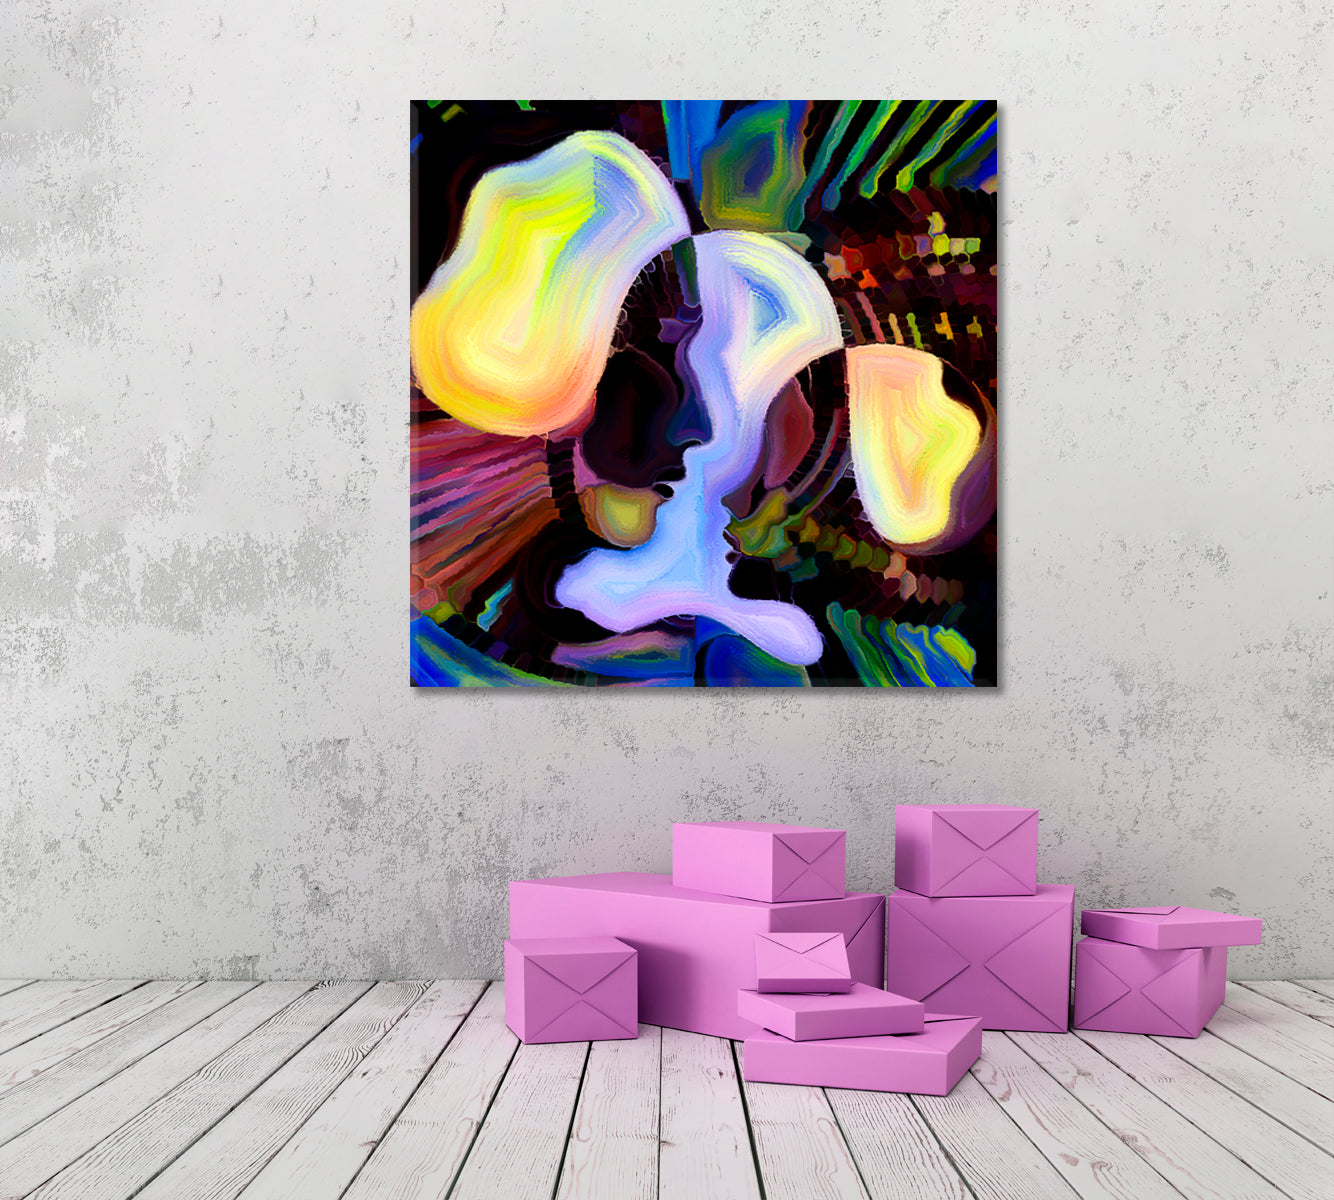 Jesus to a Child Square Panel Abstract Art Print Artesty   